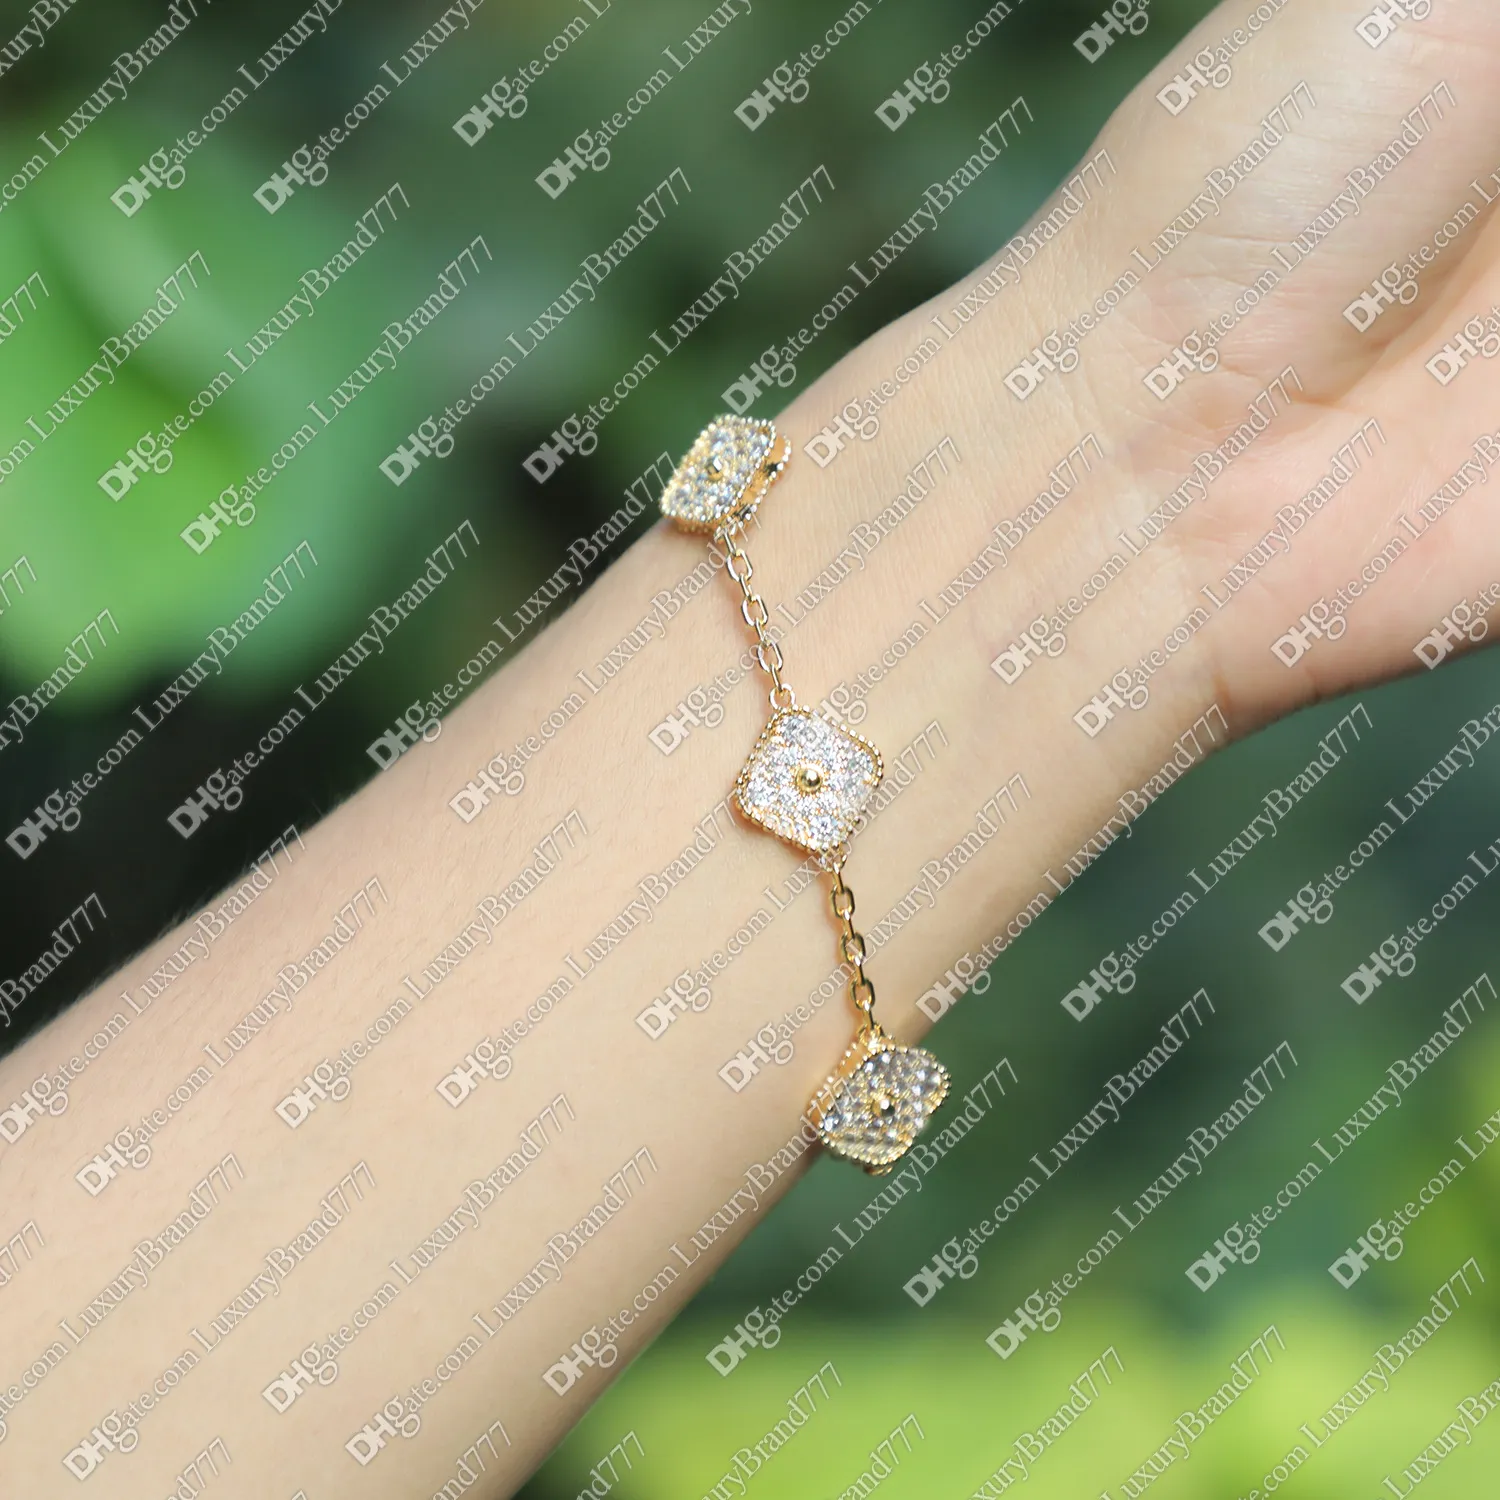 Fashion Classic Woman Bracelet 4 Four Leaf Clover Charm Jewelry Bracelet Elegant 18K Gold Agate Shell Pearl Mother and Daughter Co2421